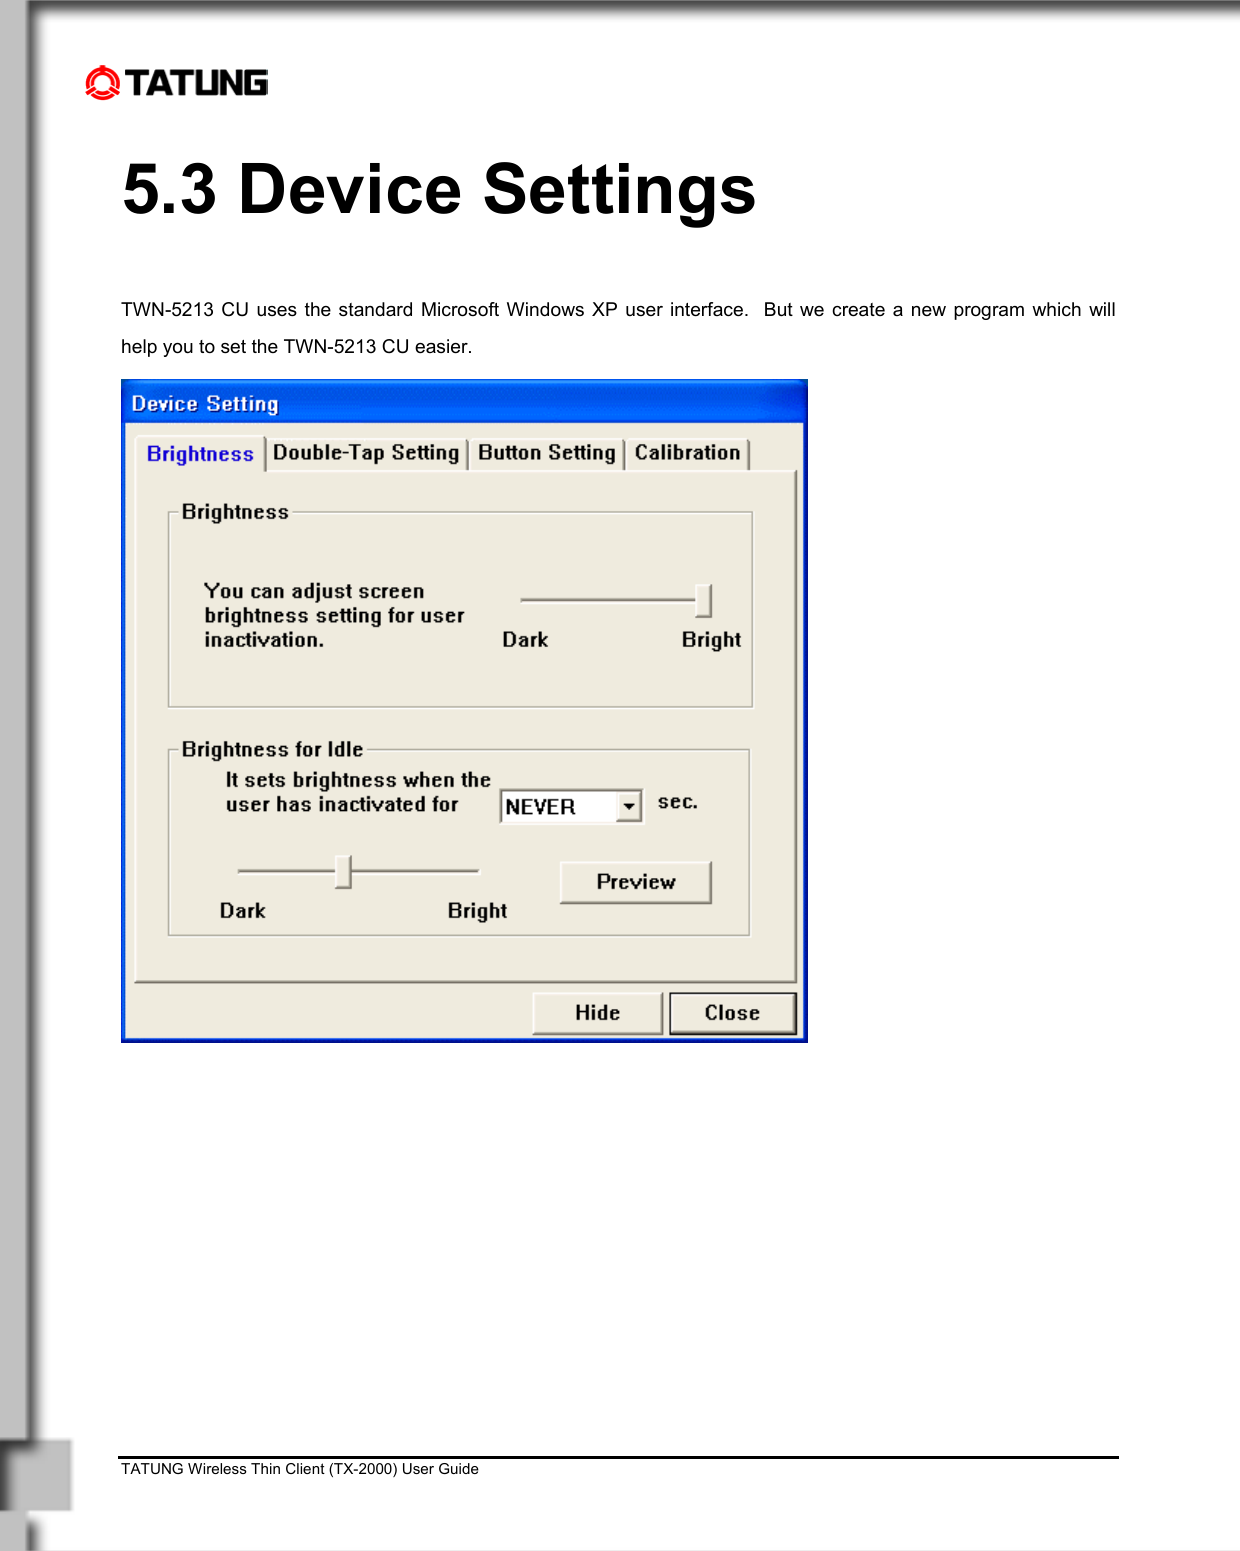    TATUNG Wireless Thin Client (TX-2000) User Guide                                                                                                                              5.3 Device Settings  TWN-5213 CU uses the standard Microsoft Windows XP user interface.  But we create a new program which will help you to set the TWN-5213 CU easier.  